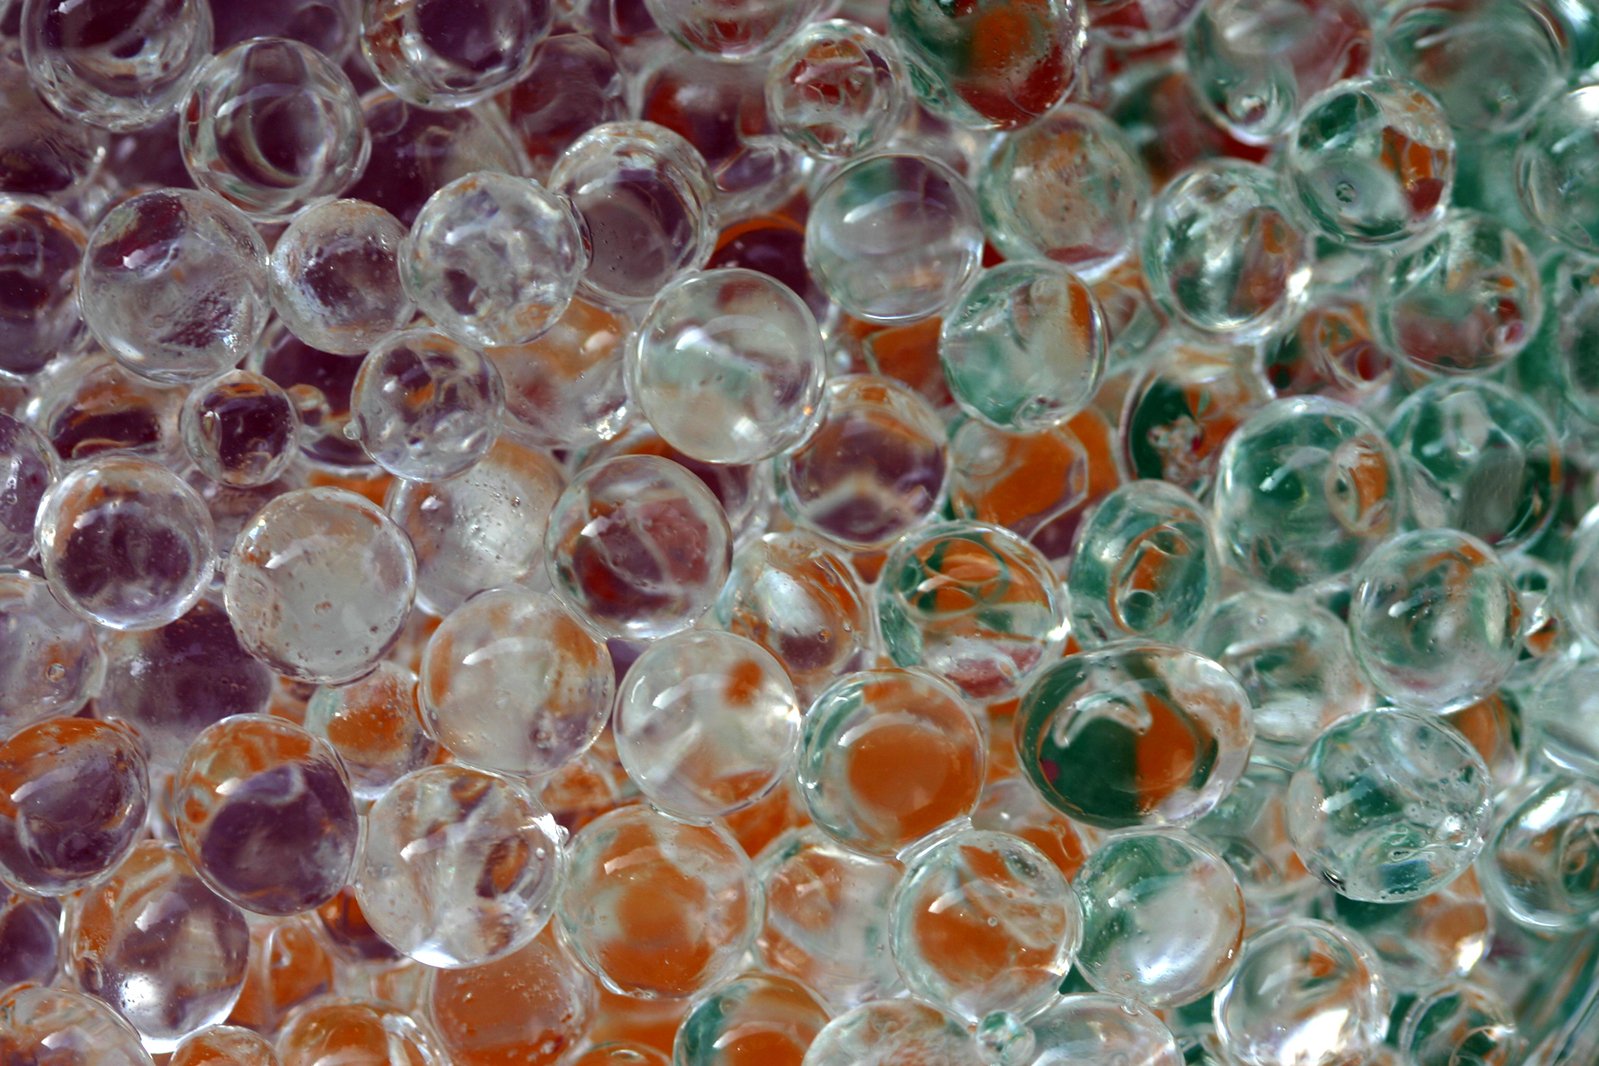 a large amount of bubbles that look like they have colorful colors